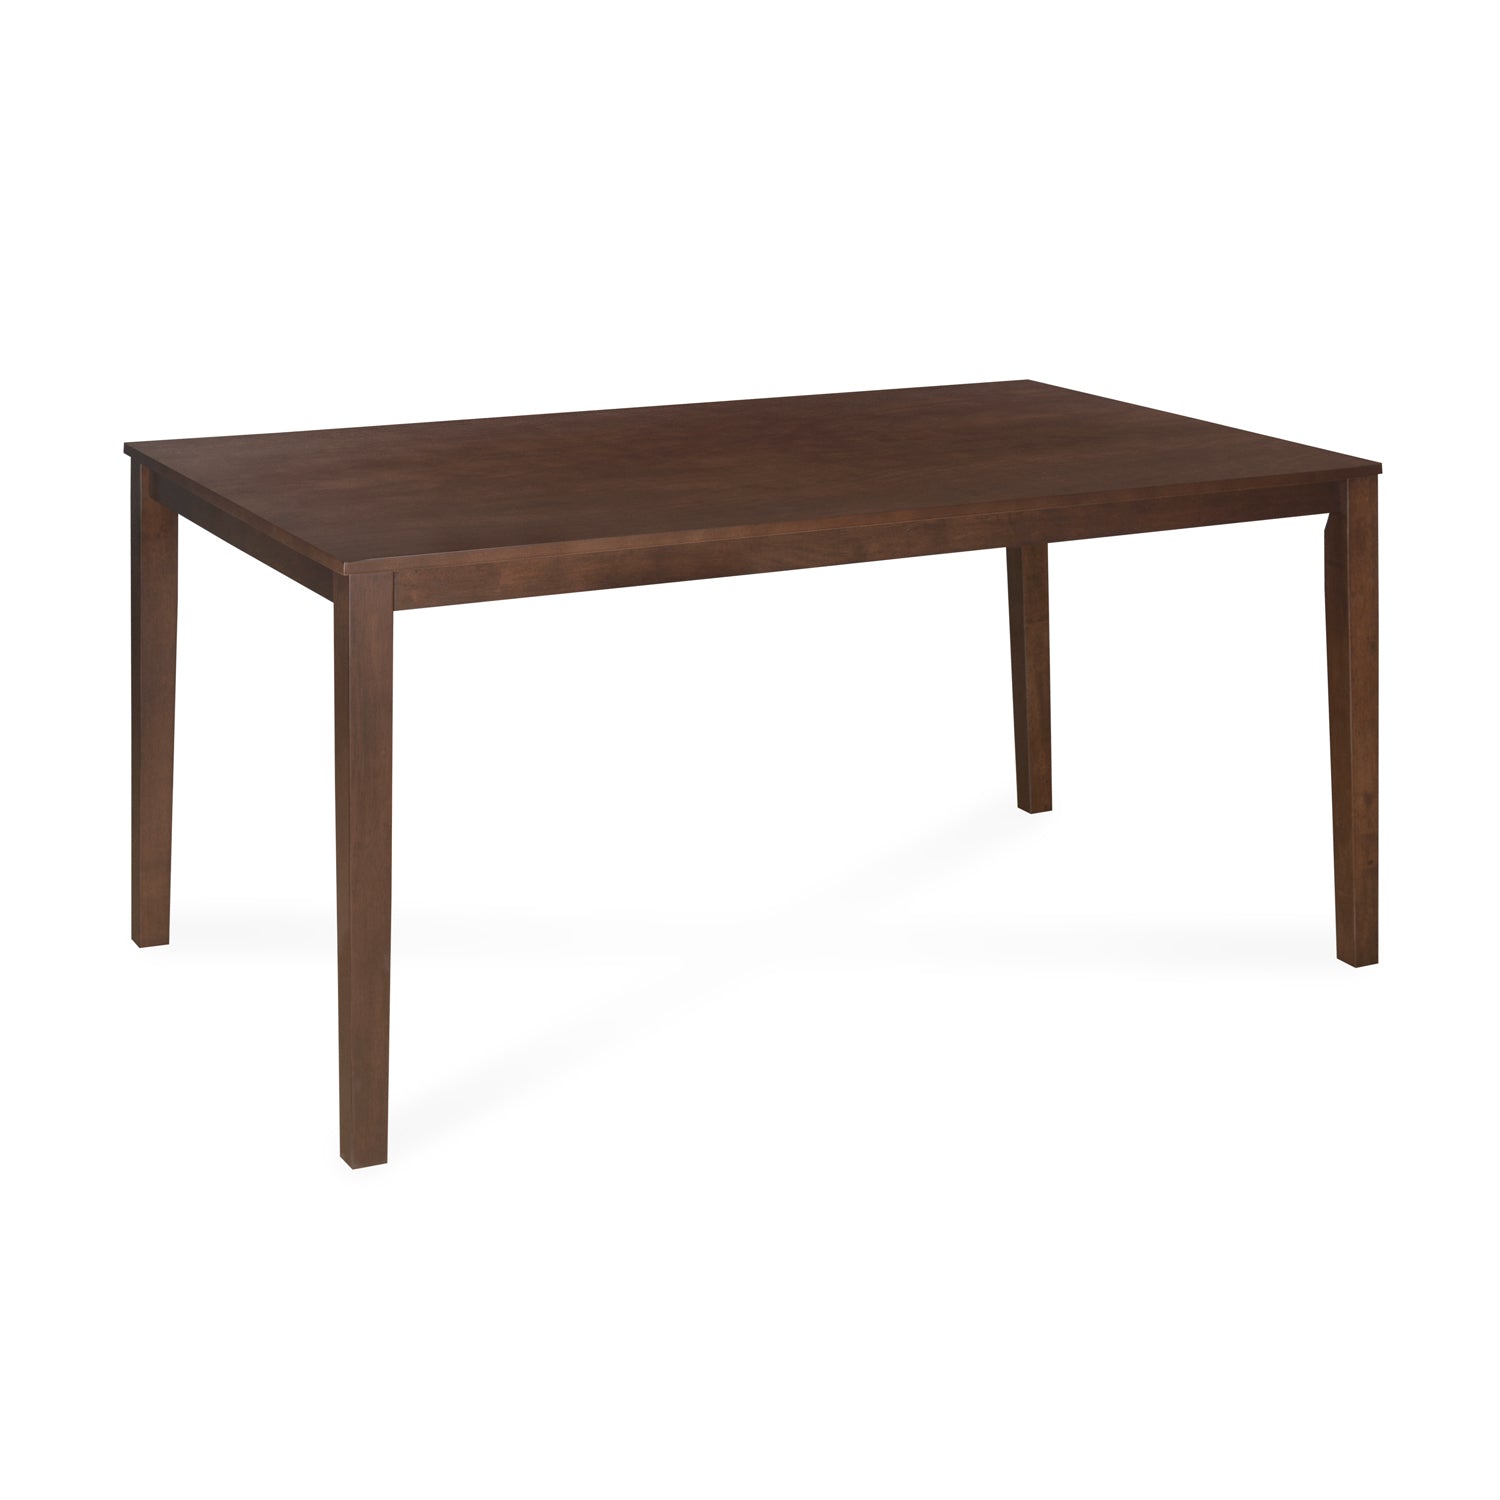 Gem 6 Seater Dining Table (Brown)